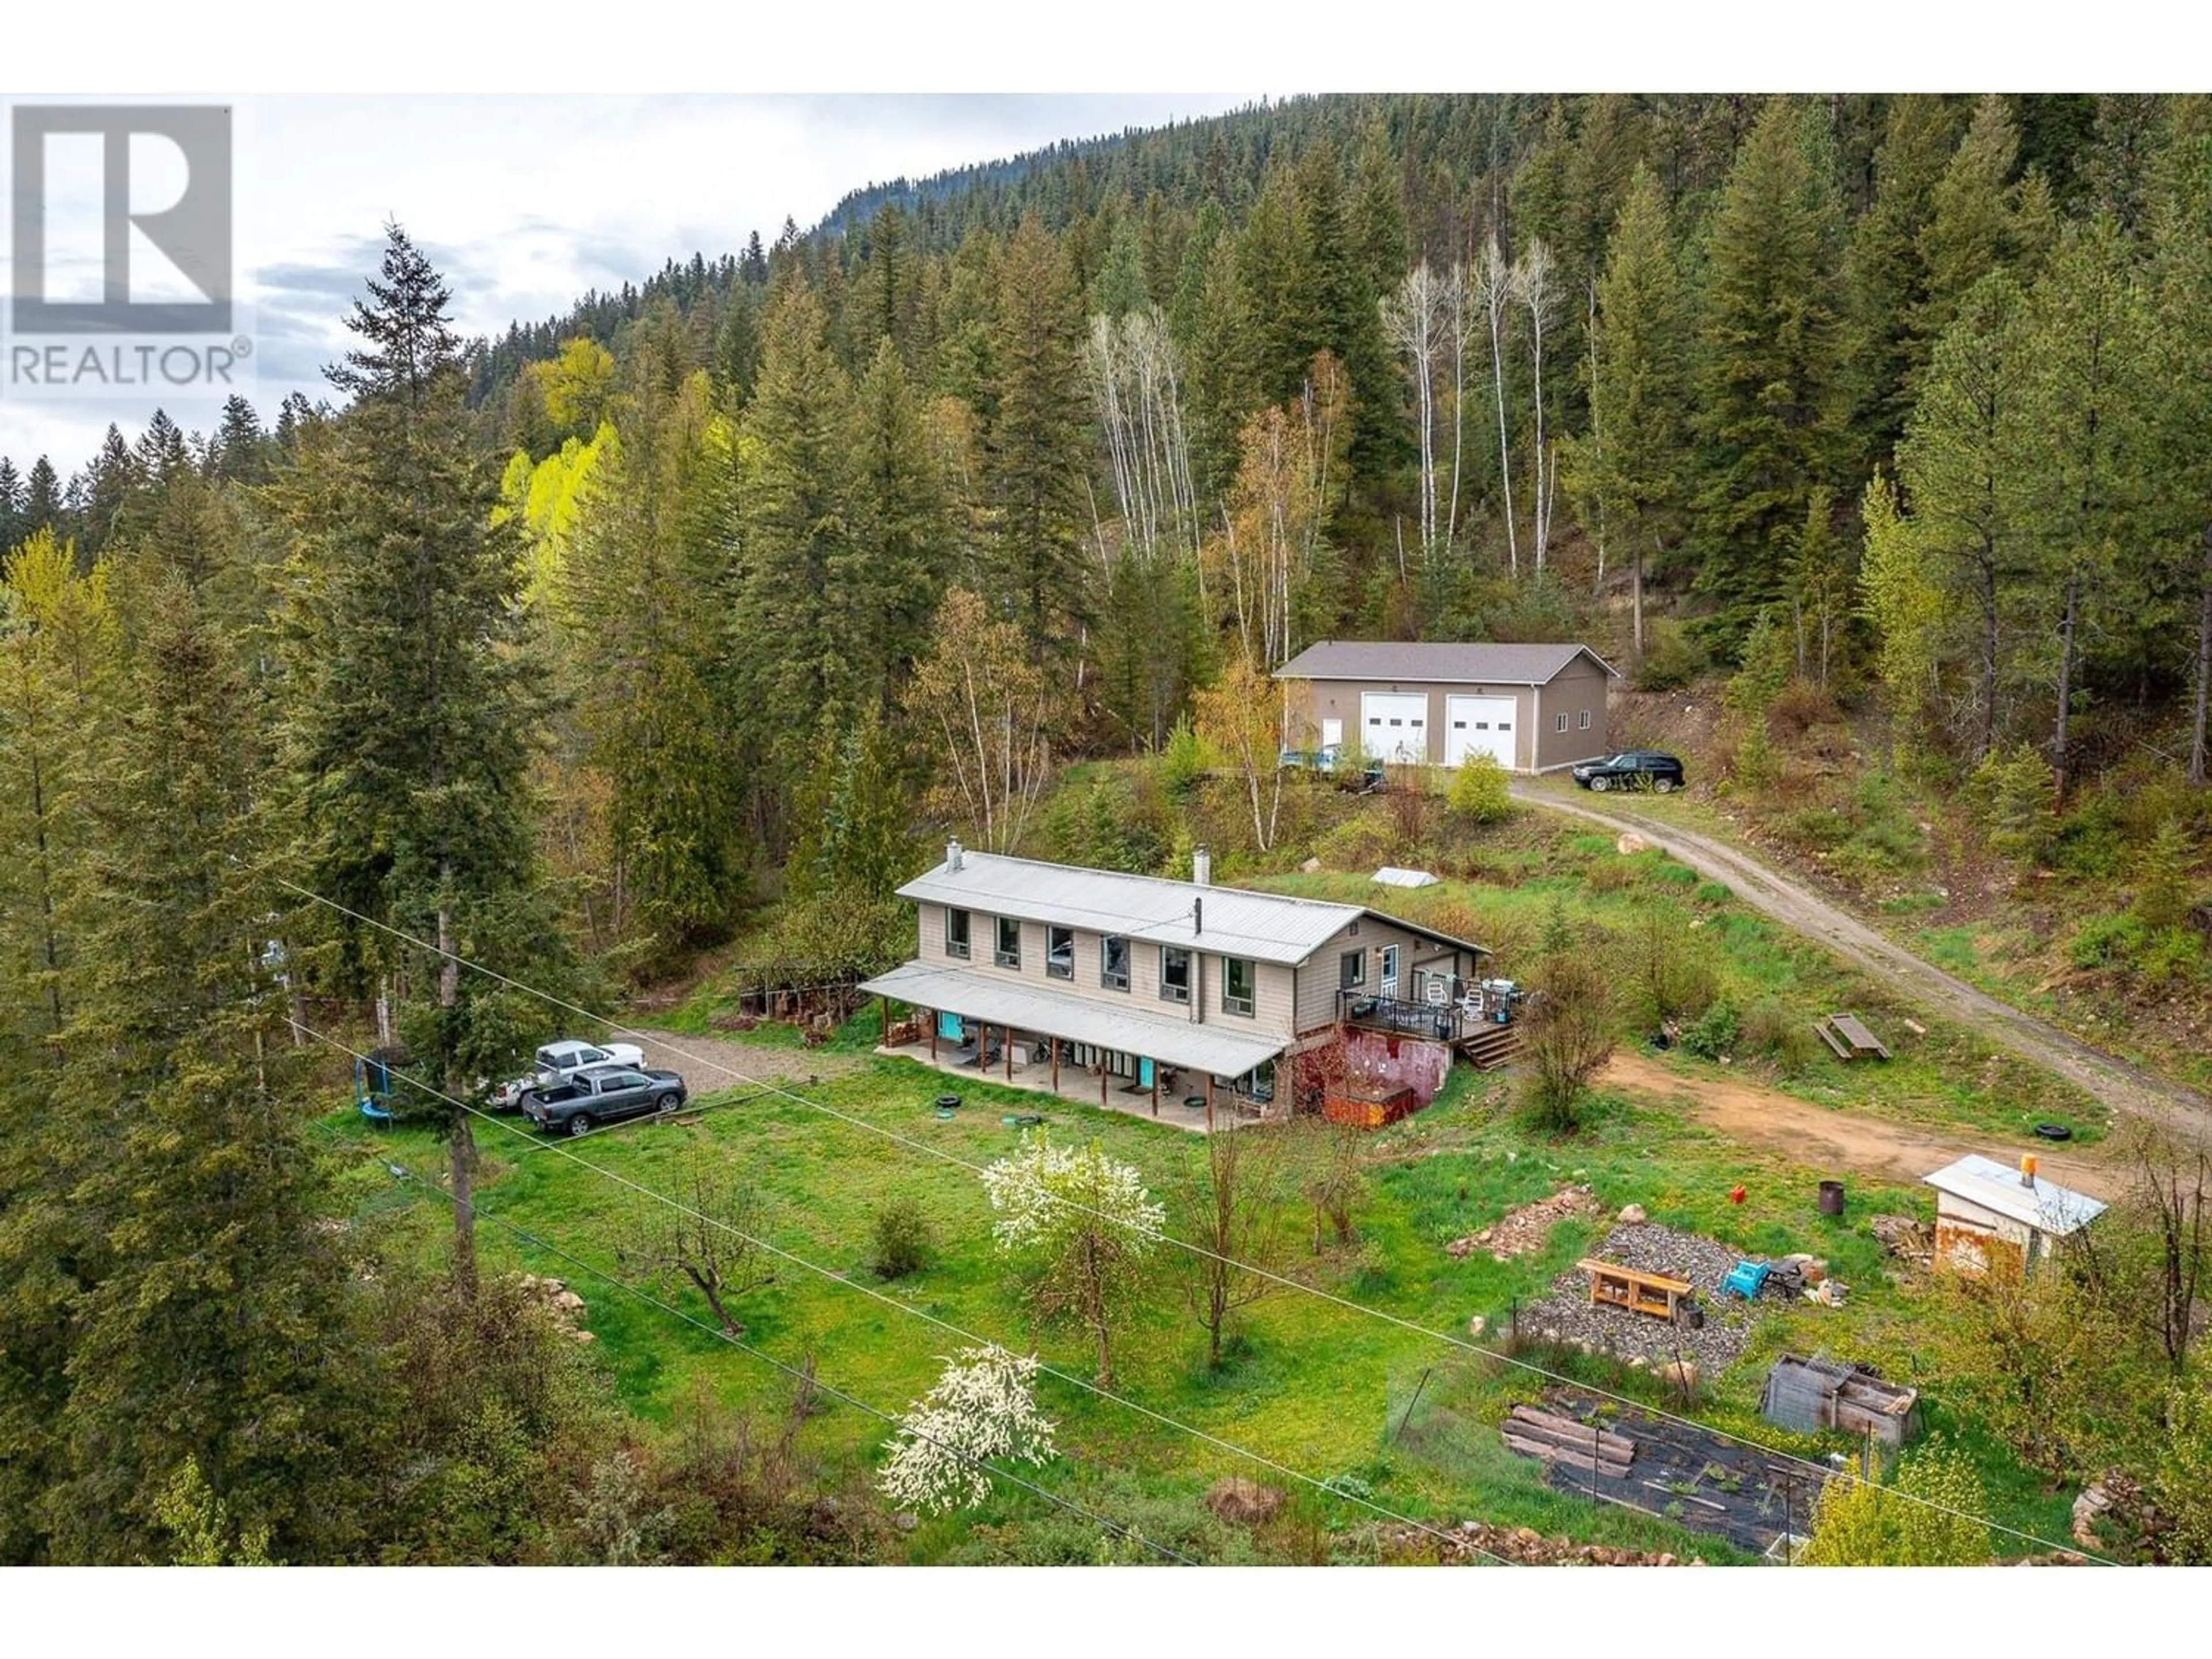 Outside view for 785 Shuswap River Drive, Lumby British Columbia V0E2G0